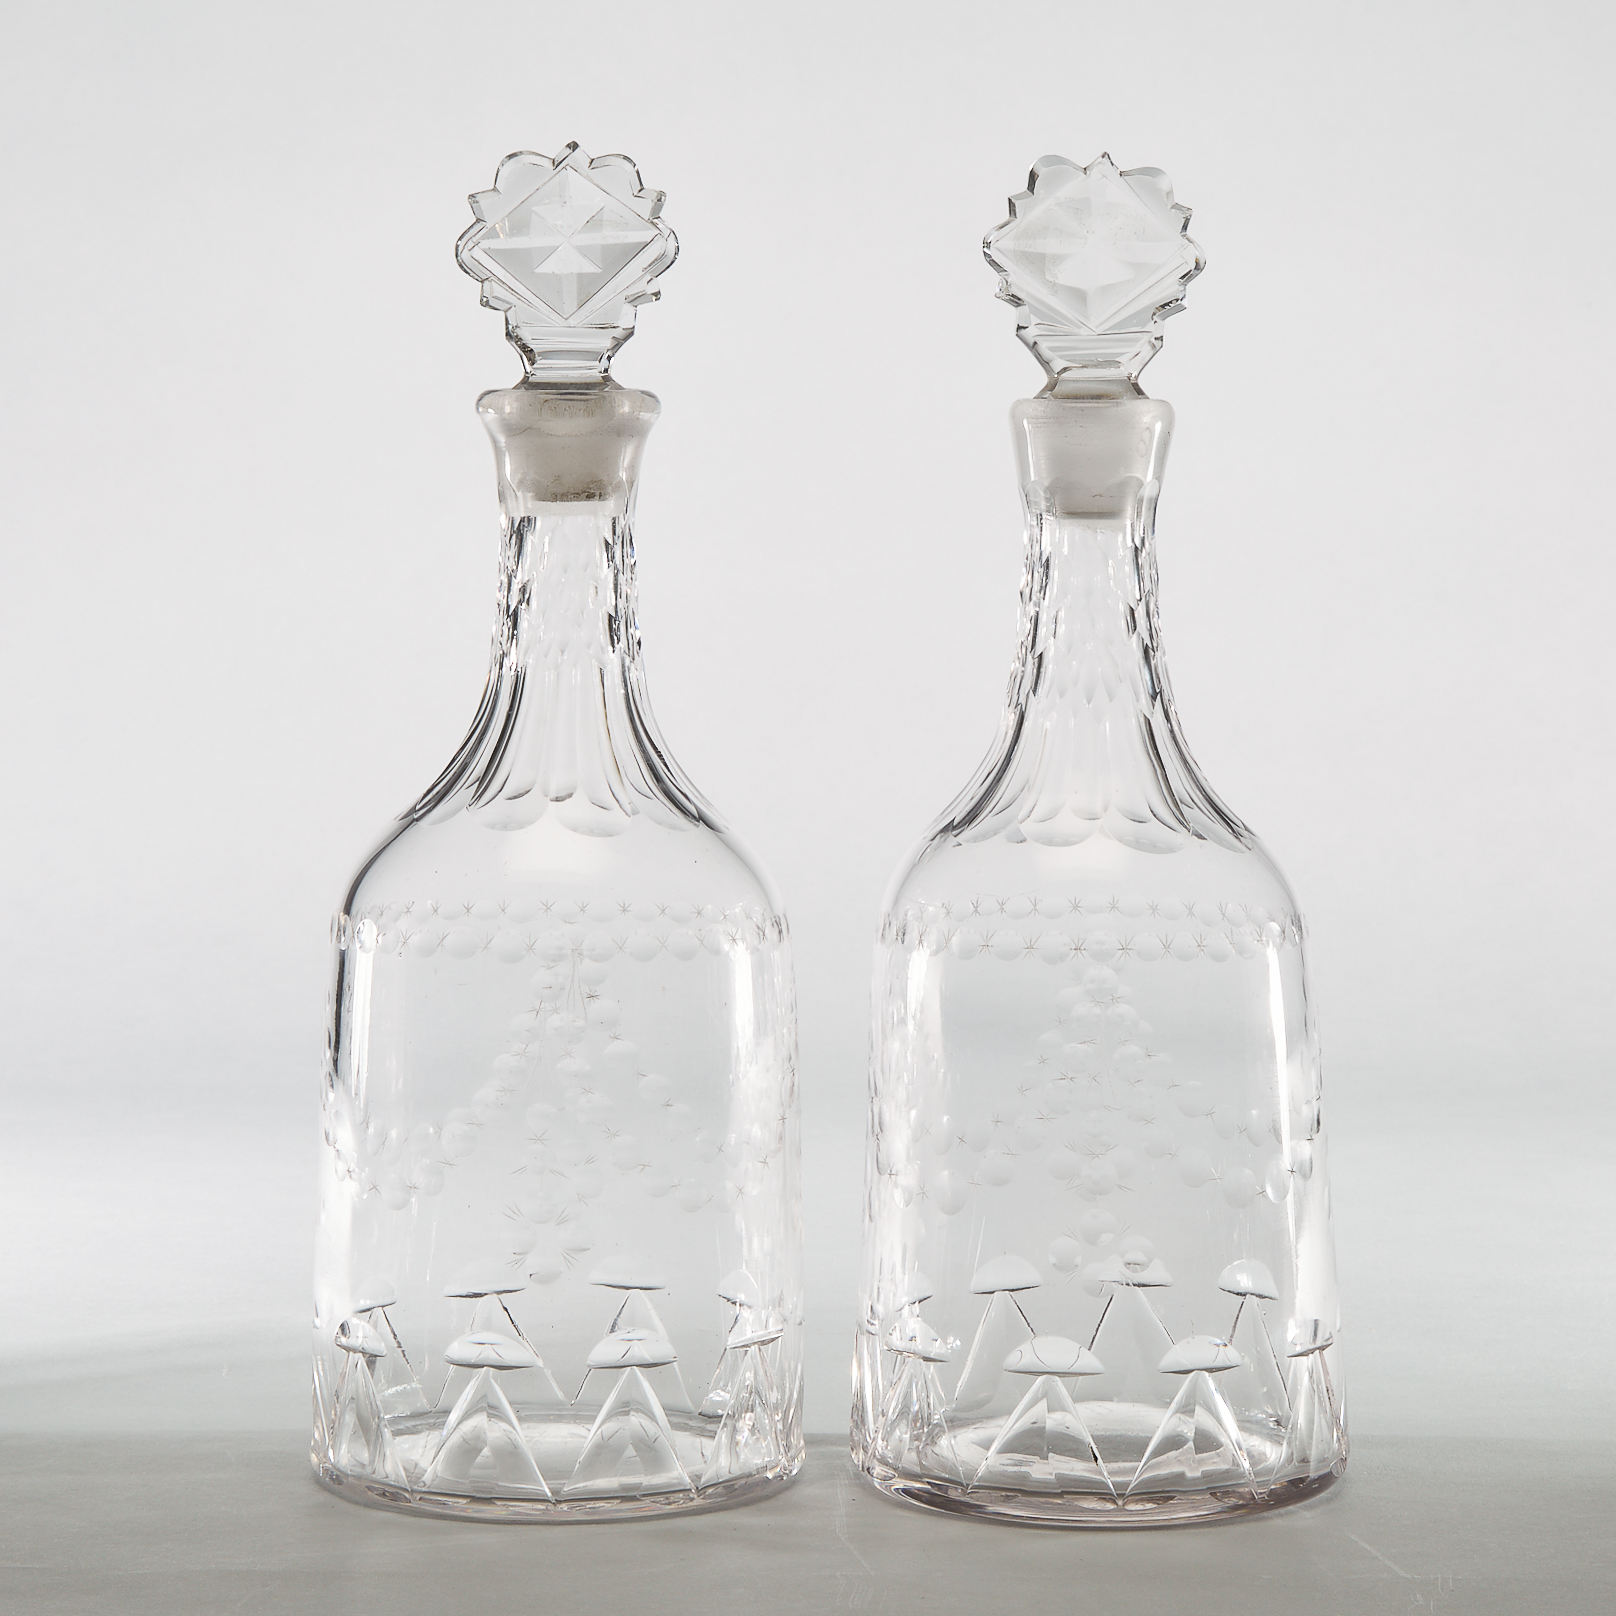 Pair of Anglo-Irish Cut Glass Decanters, c.1800